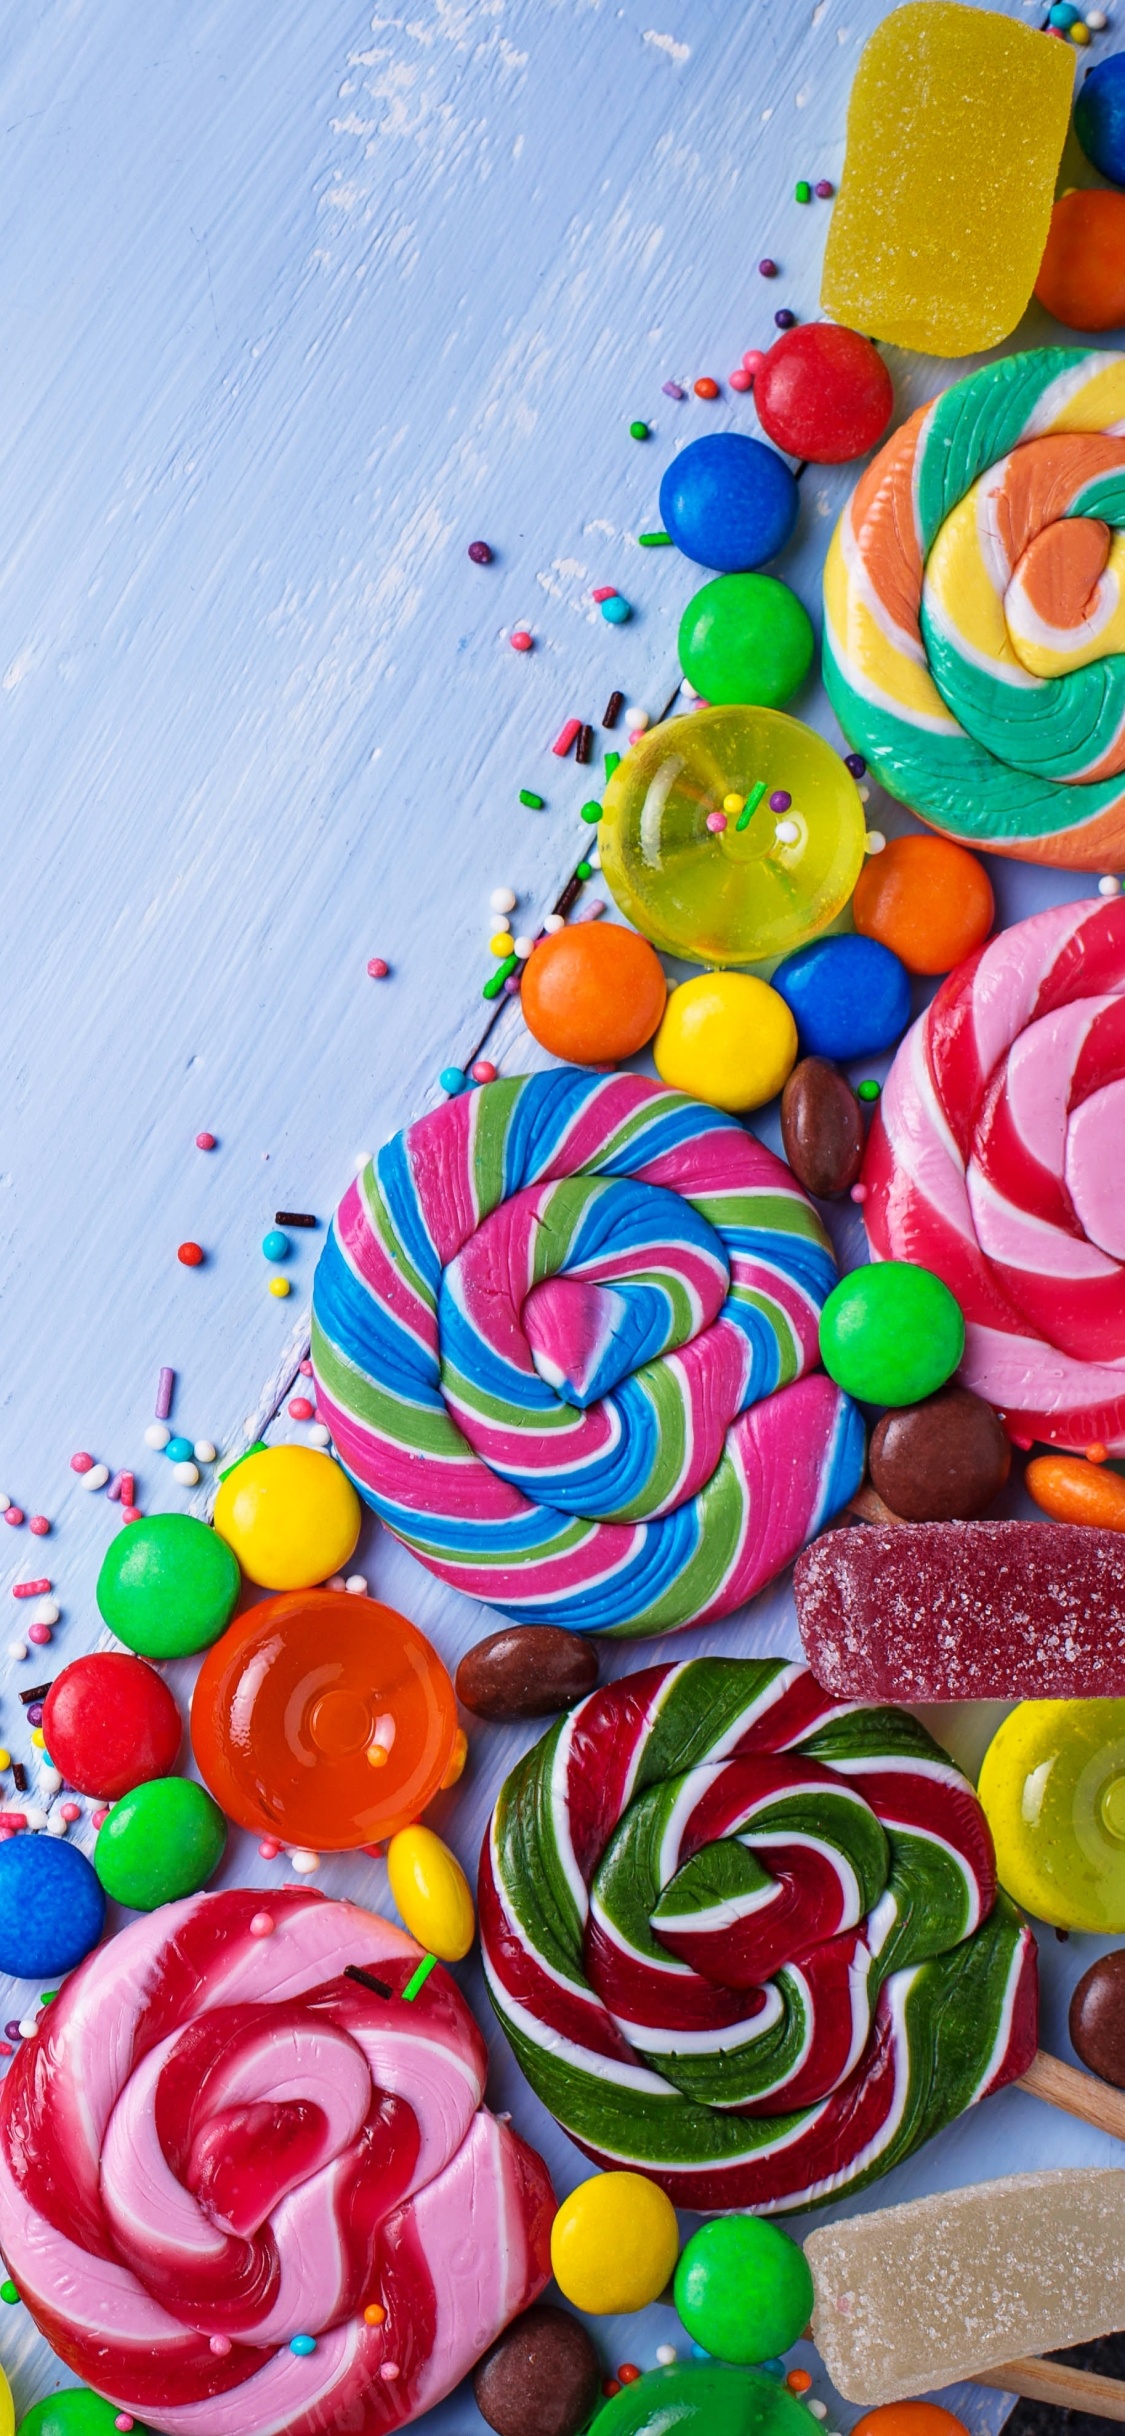 Candy-filled delight, Sweet and satisfying, Perfect for food lovers, Tempting indulgence, 1130x2440 HD Handy